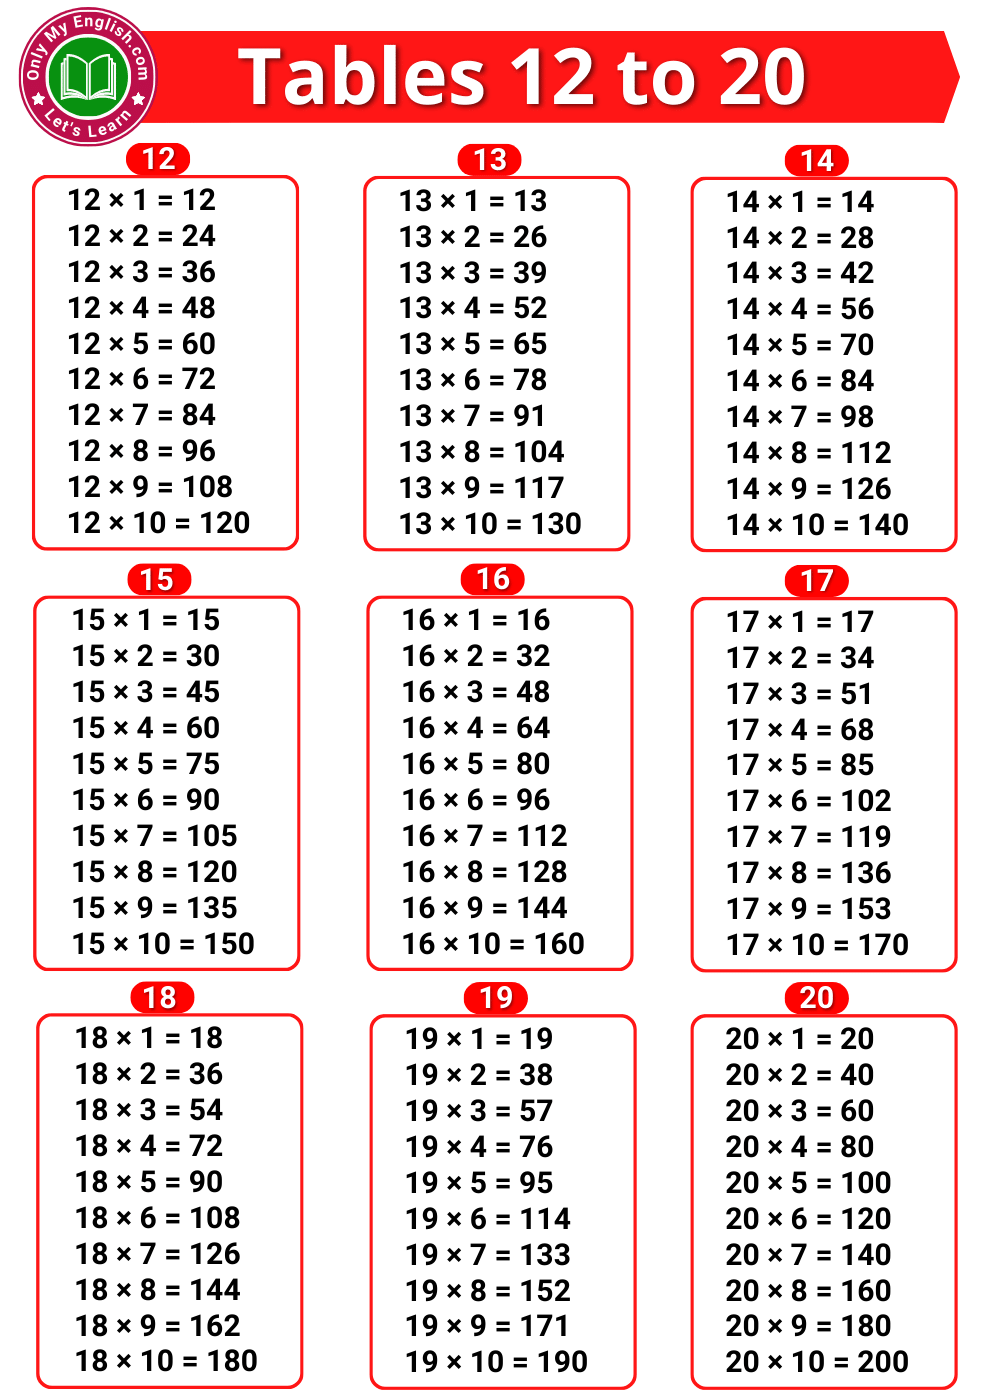 tables-12-to-20-multiplication-tables-12-to-20-onlymyenglish